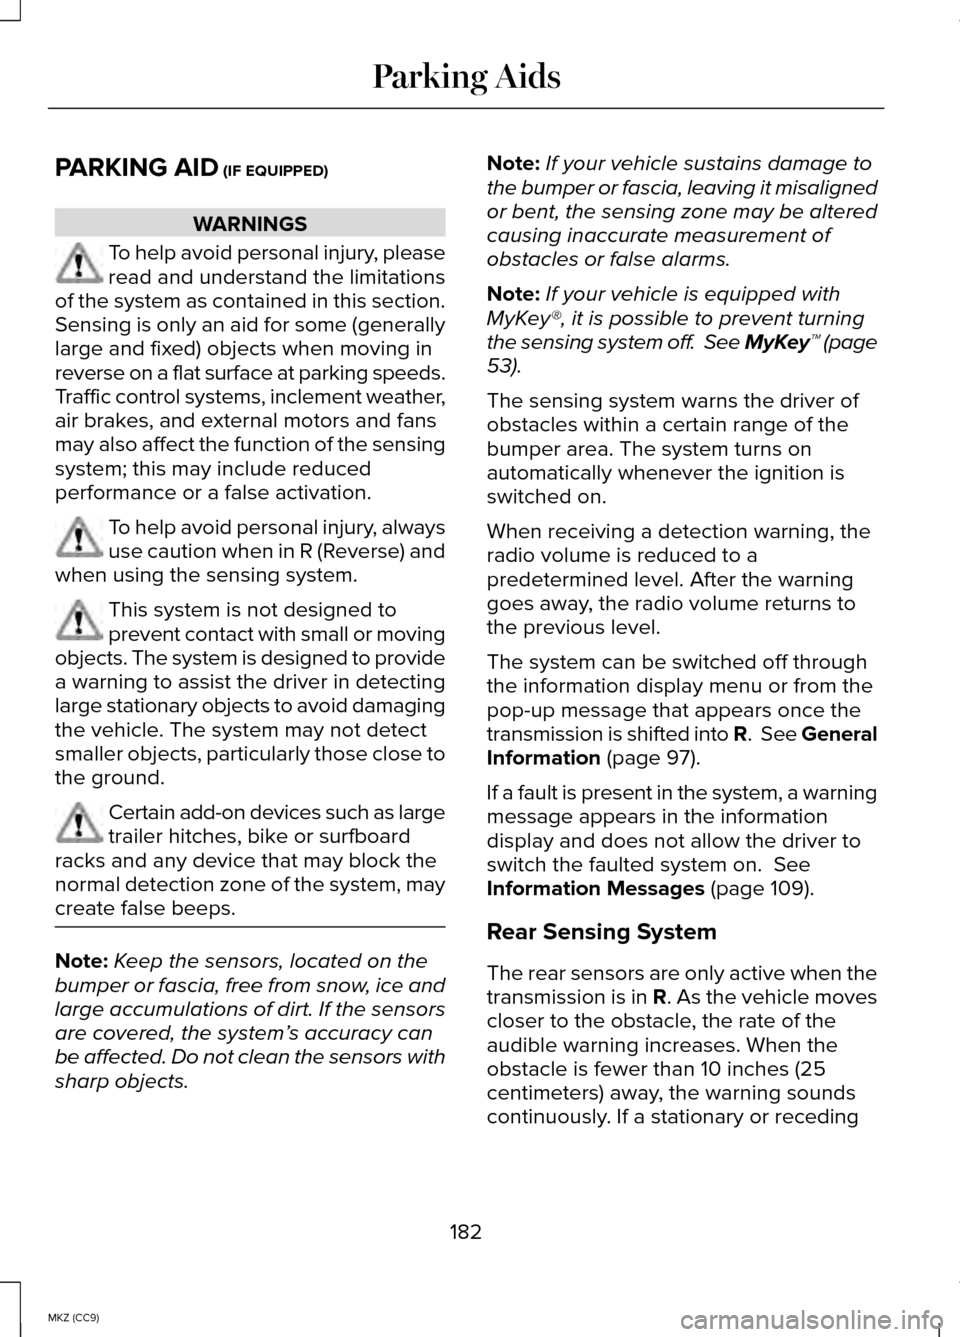 LINCOLN MKZ HYBRID 2014  Owners Manual PARKING AID (IF EQUIPPED)
WARNINGS
To help avoid personal injury, please
read and understand the limitations
of the system as contained in this section.
Sensing is only an aid for some (generally
larg